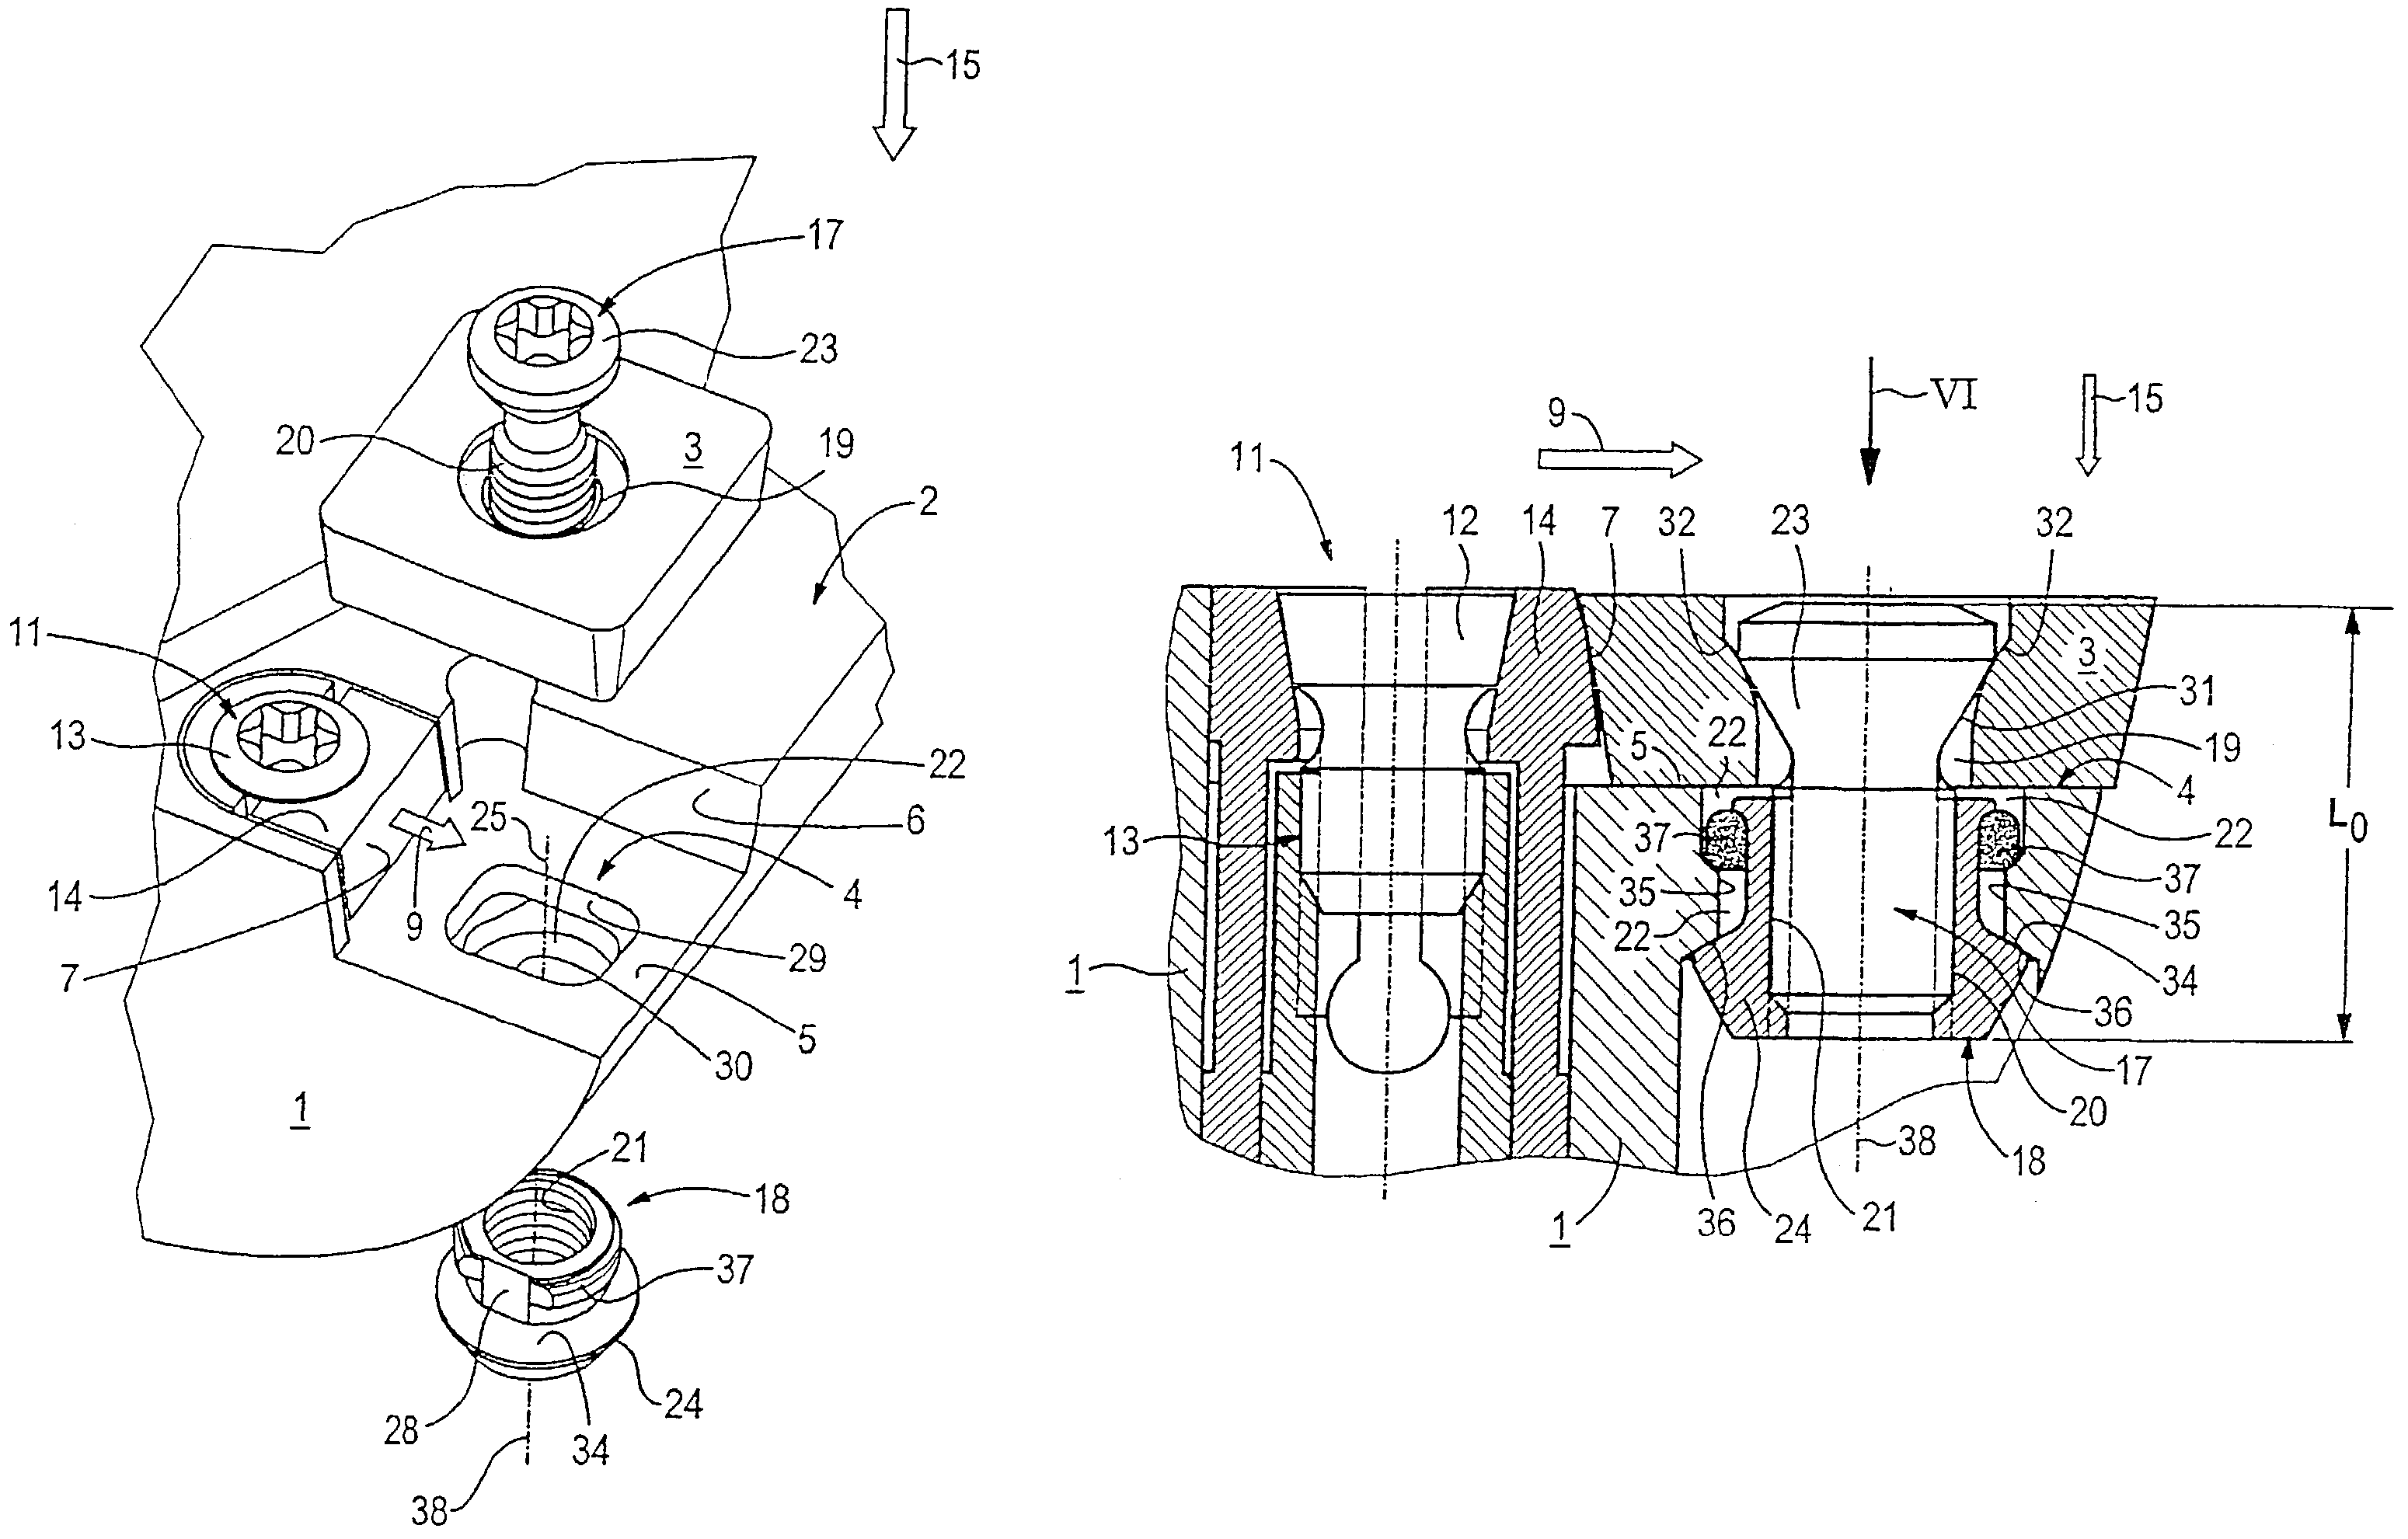 Reamer with clamping arrangement for adjusting cutting insert and other cutting tools with clamping arrangements for adjusting cutting inserts